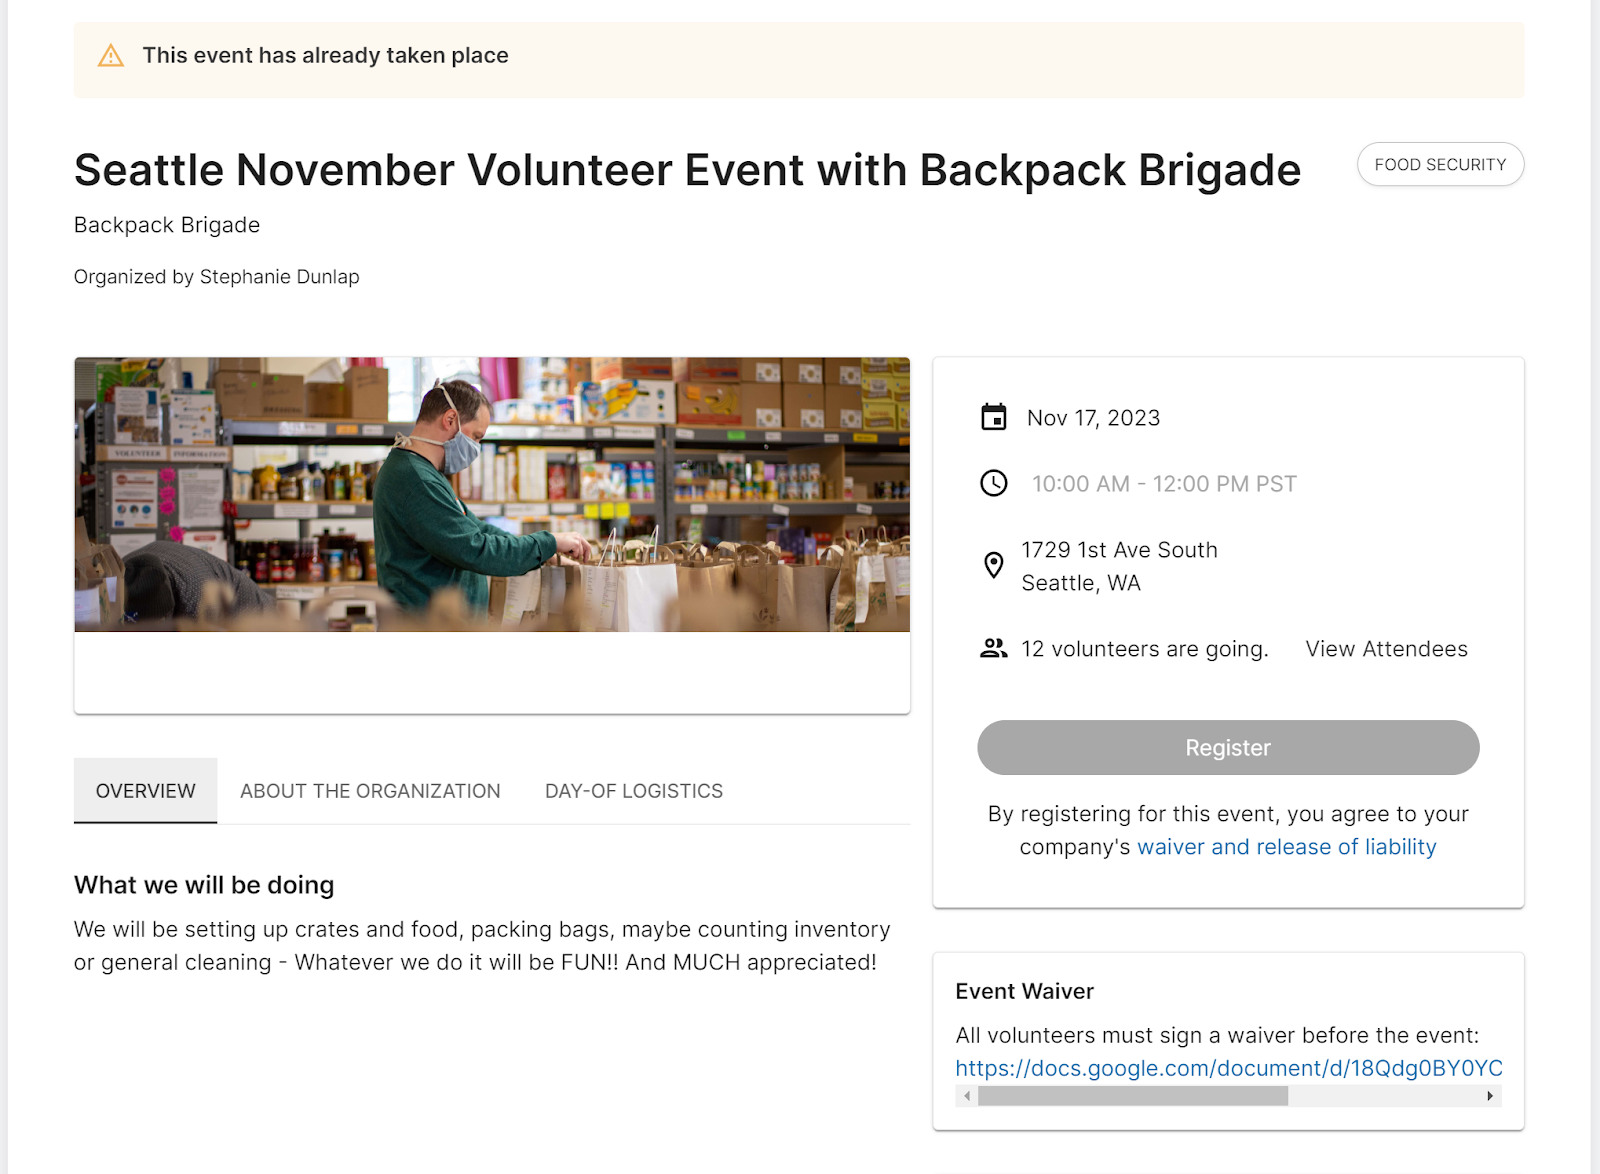 A view of our volunteer event in the Submittable employee volunteer platform.